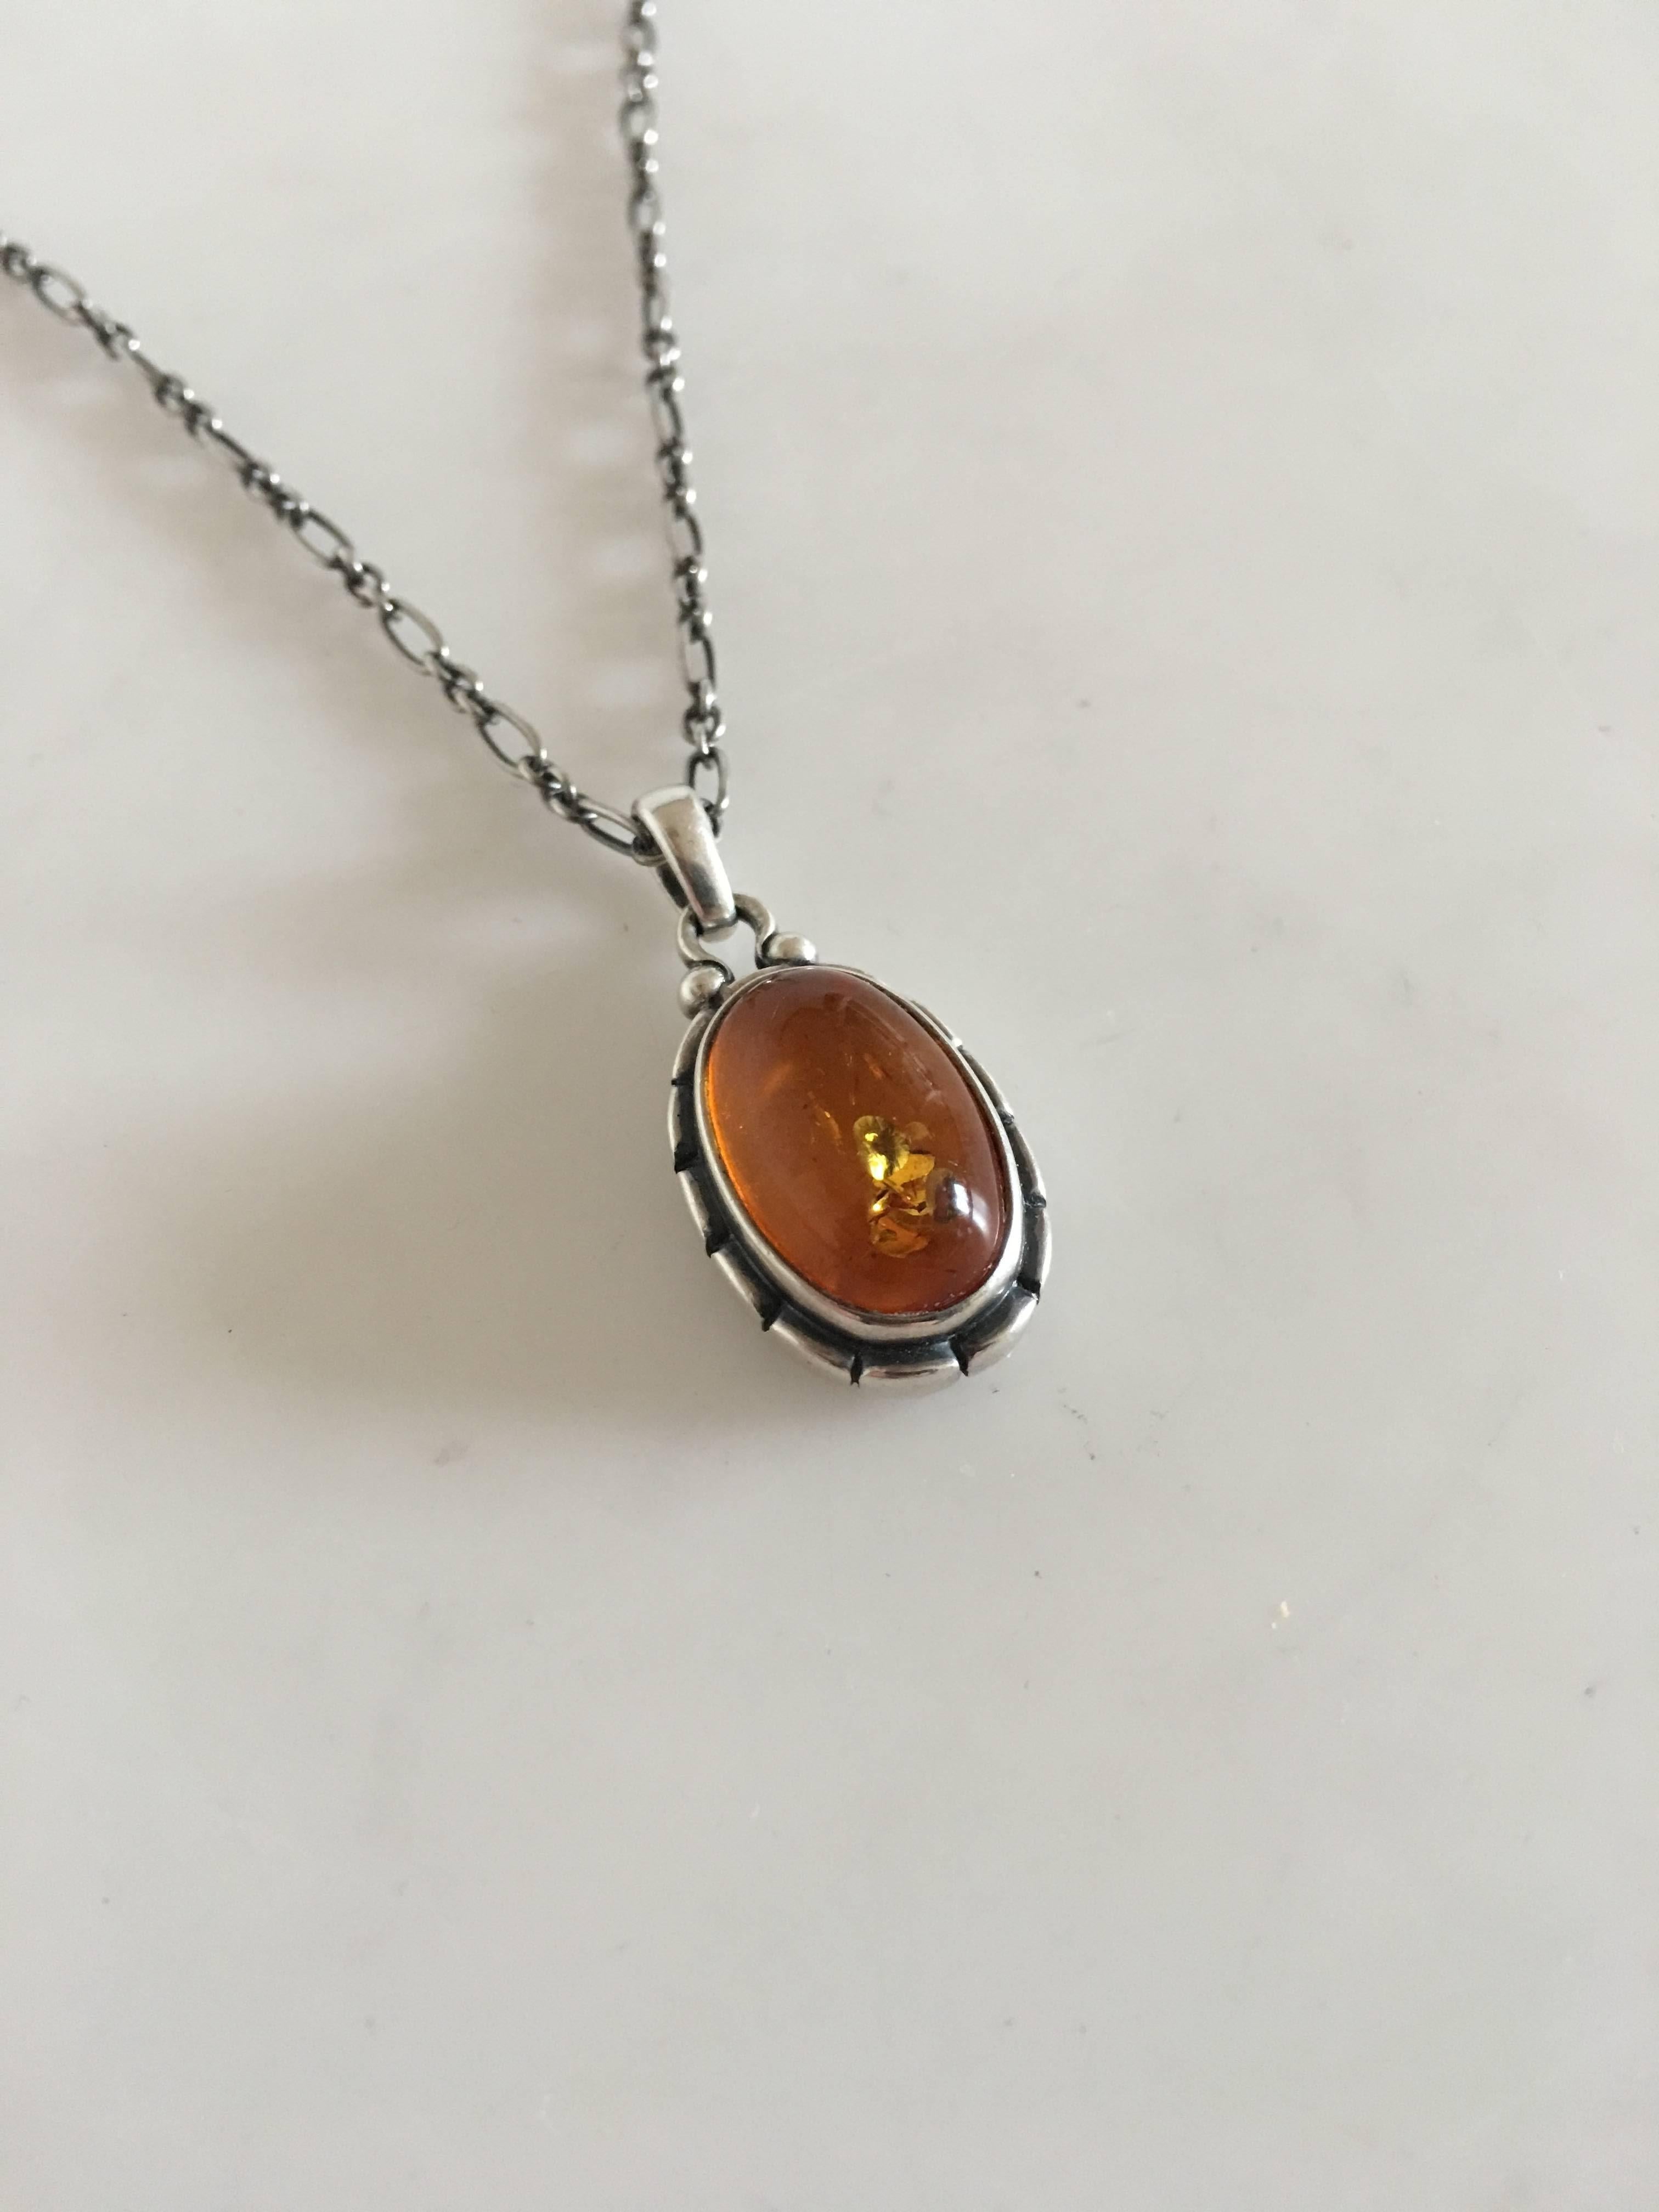 Georg Jensen annual pendant in sterling silver with amber stone, 2001. Chain measures 45 cm L. Pendant measures 2.4 cm. Chain and pendant measures 12 grams (0.40 oz).